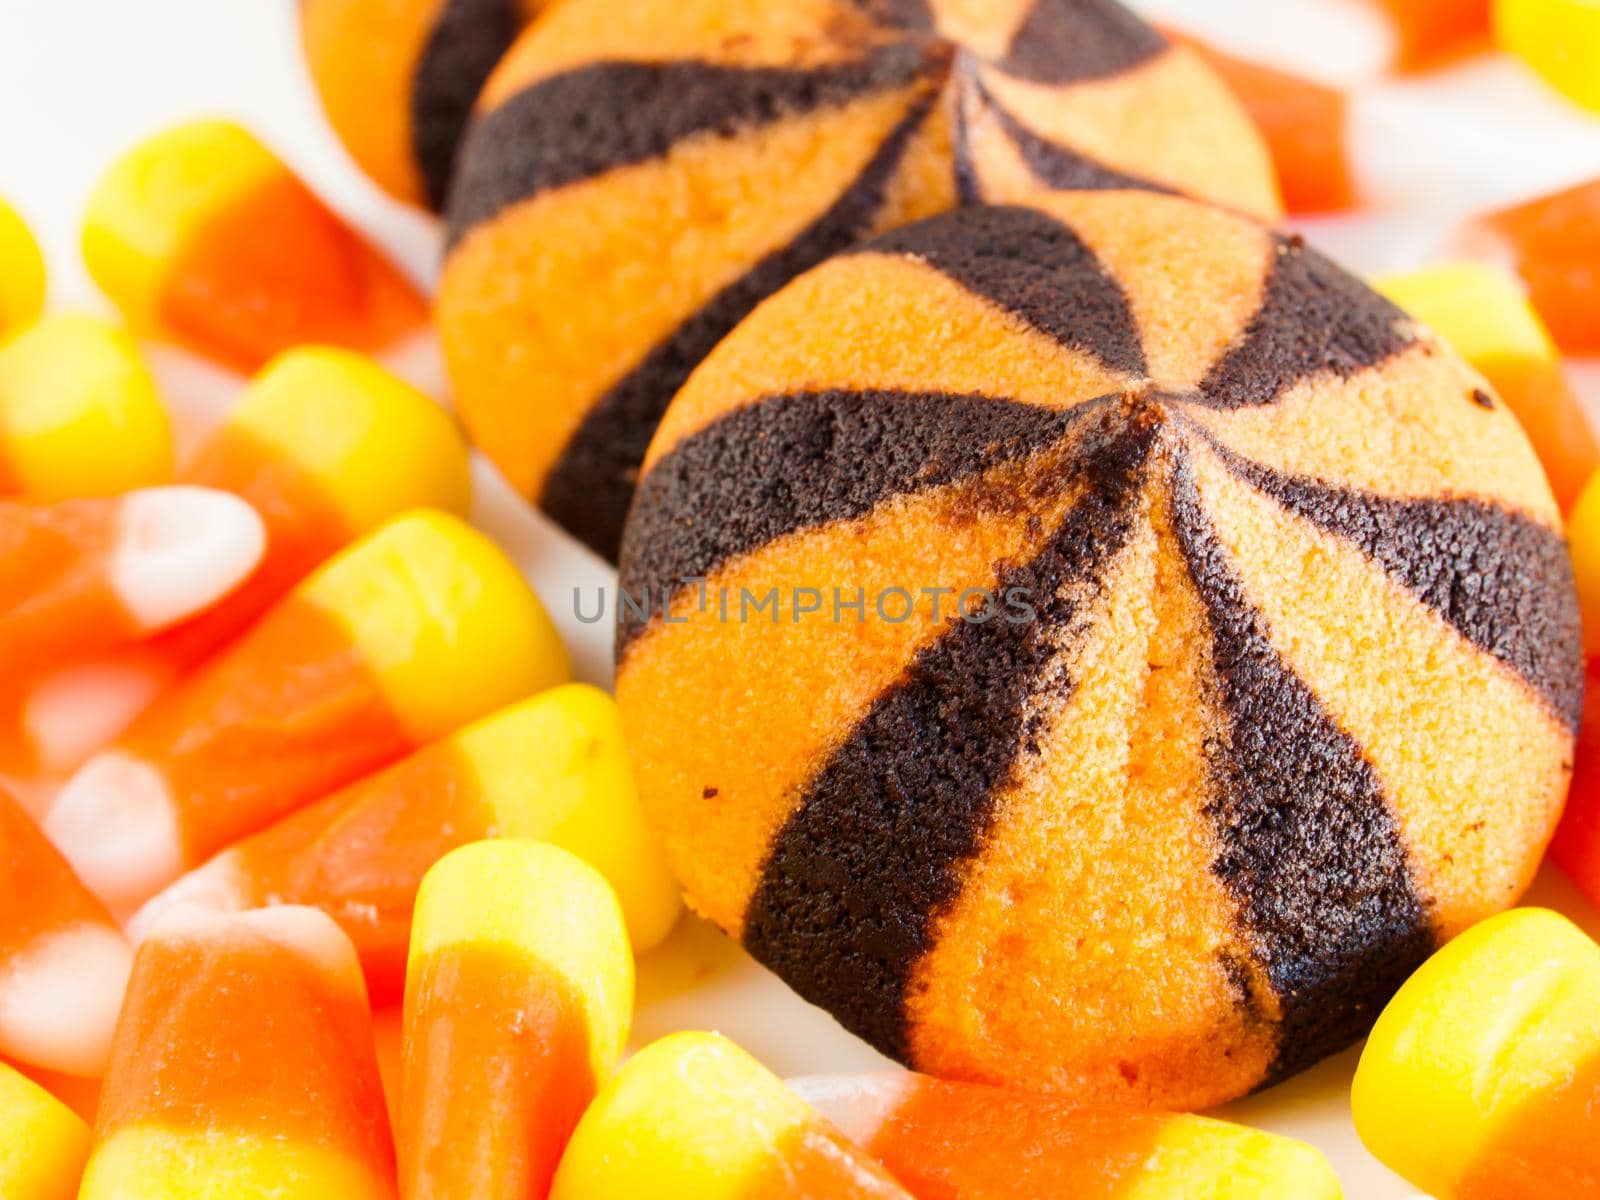 Halloween star drop cookies on white background.